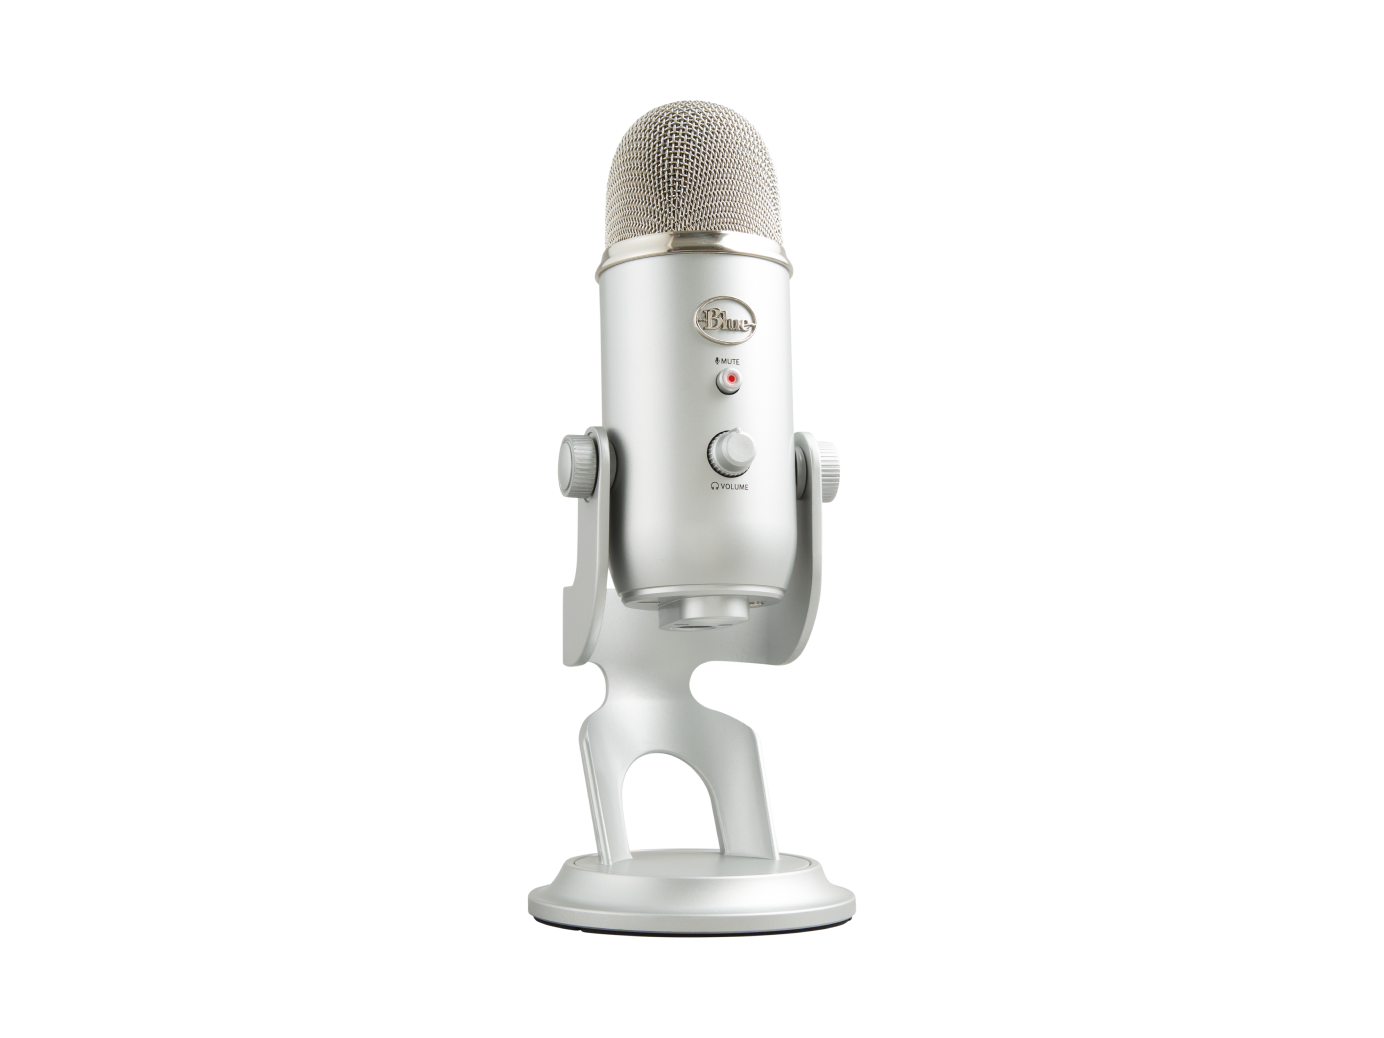 Image of Yeti Premium Multi-Pattern USB Microphone with Blue VO!CE - Silver